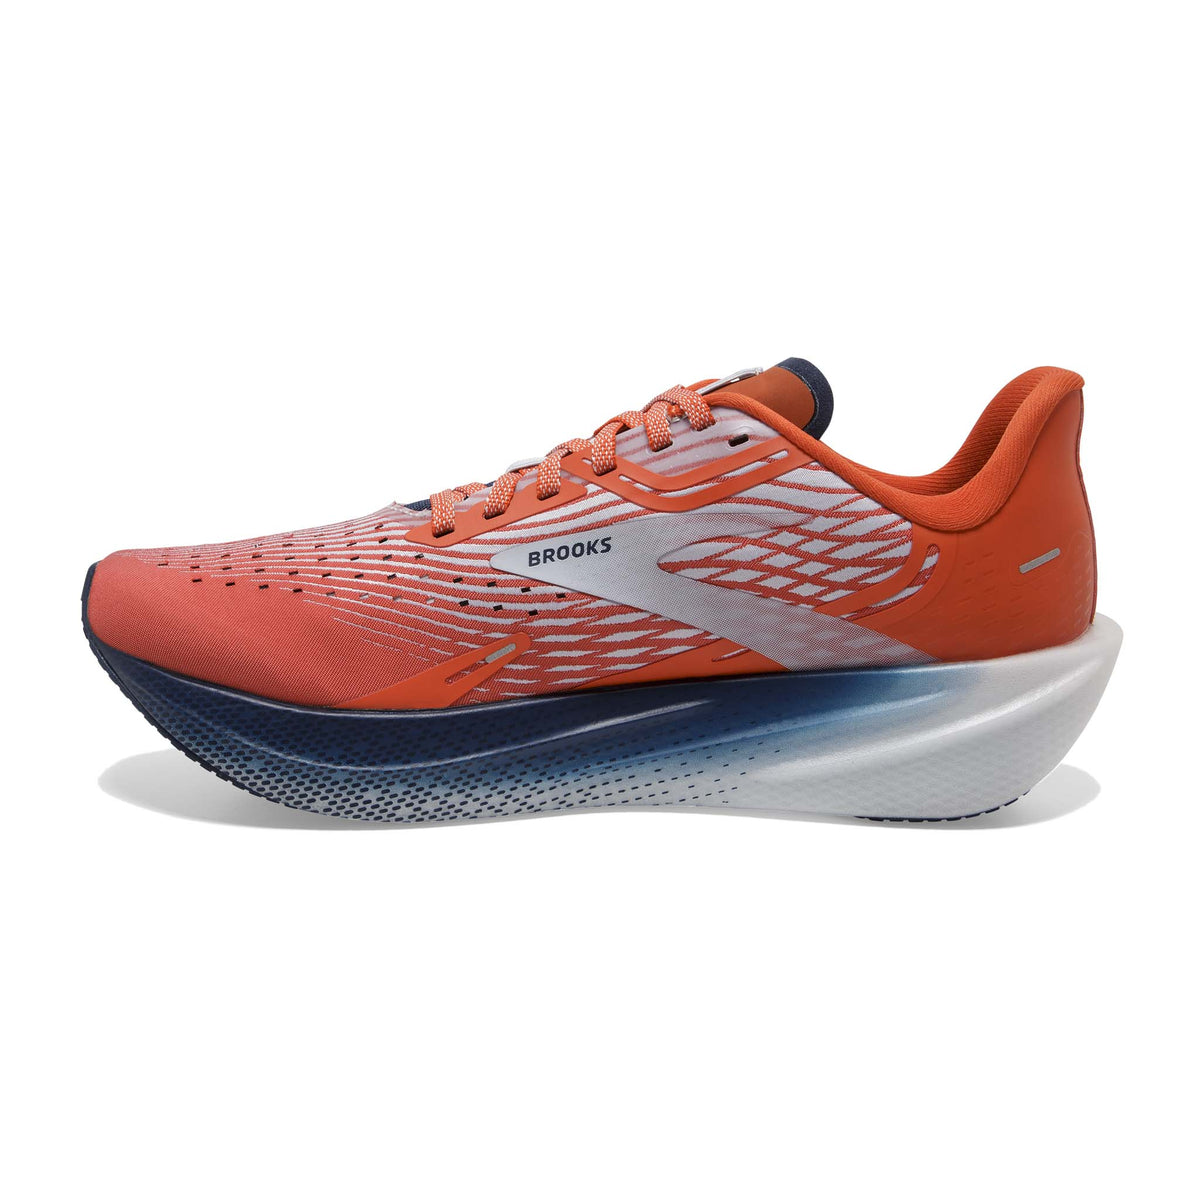 Brooks Hyperion Max souliers de course homme - Cherry Tomato / Arctic Ice / Titan - lateral